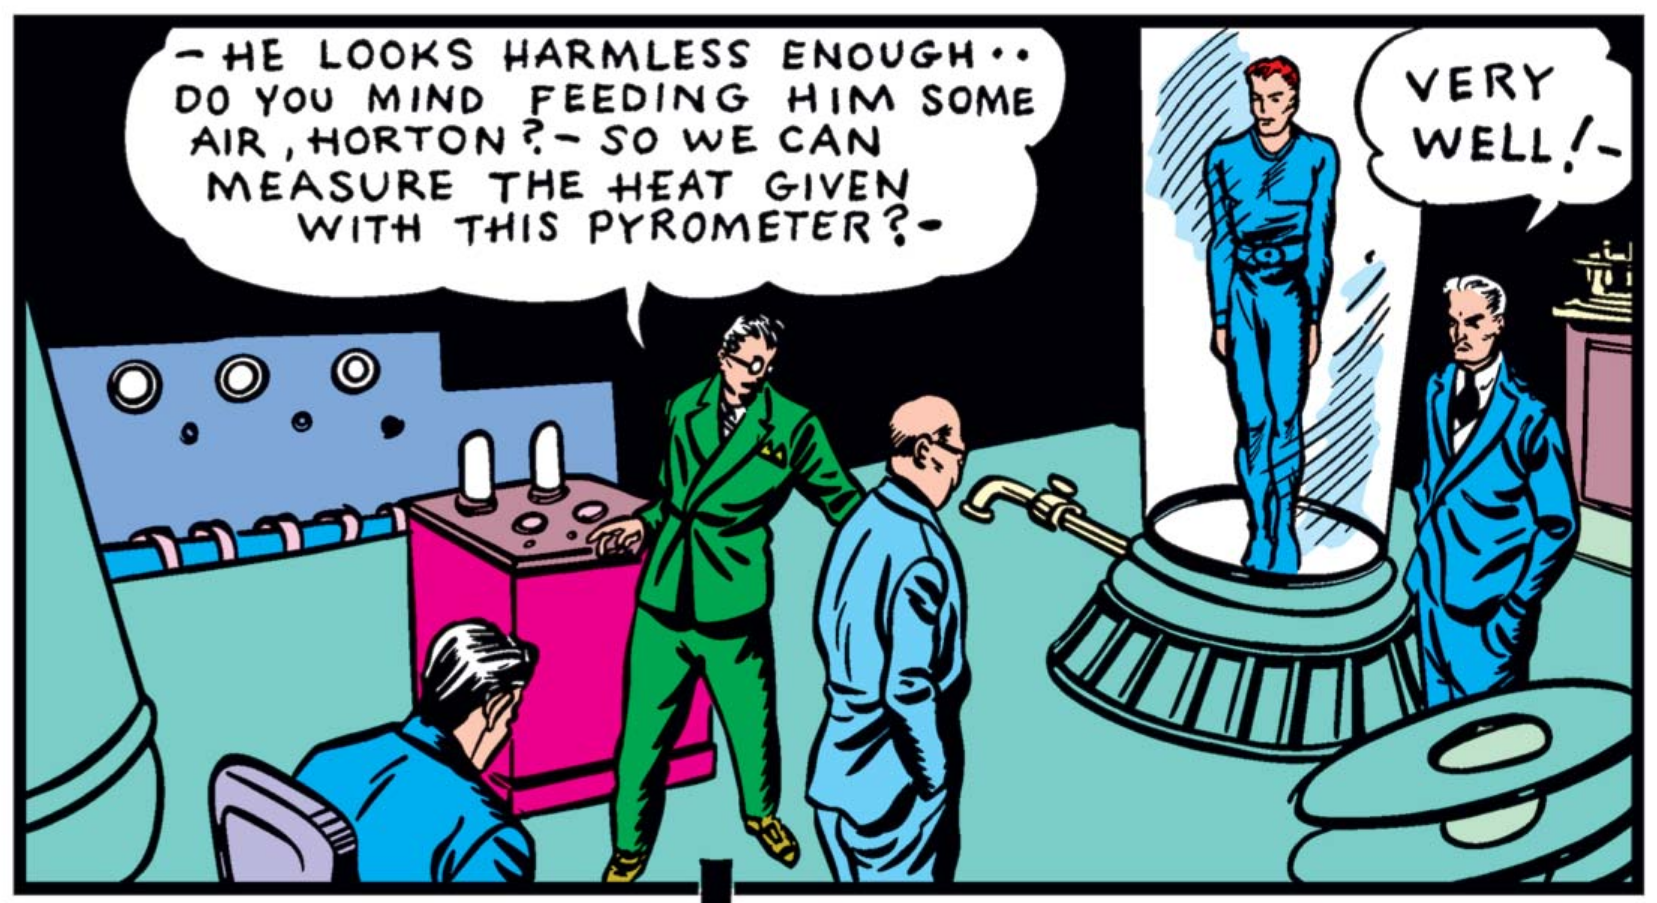 Down in Horton's lab, the green-suited member of the scientists' guild stands by a weird pink machine, saying " - He looks harmless enough -- do you mind feeding him some air, Horton? - So we can measure the heat given with this pyrometer?" Horton stands to the side, next to the inert Human Torch, and says "Very Well! -"